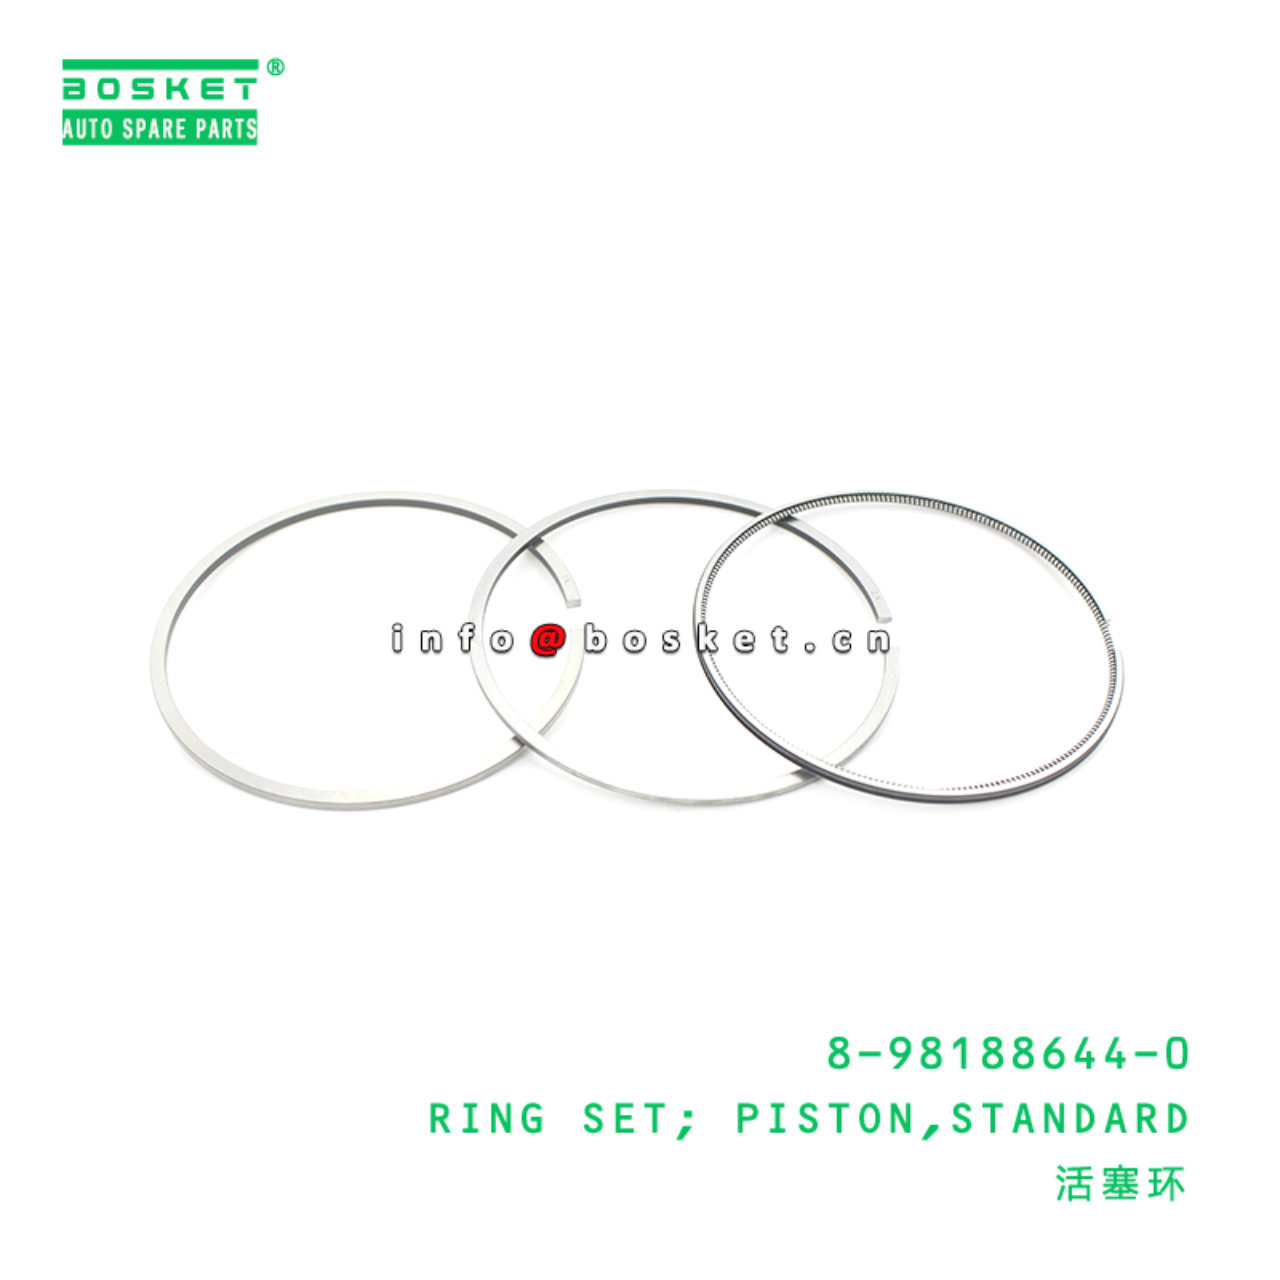 8-98188644-0 Standard Piston Ring Set Suitable for...